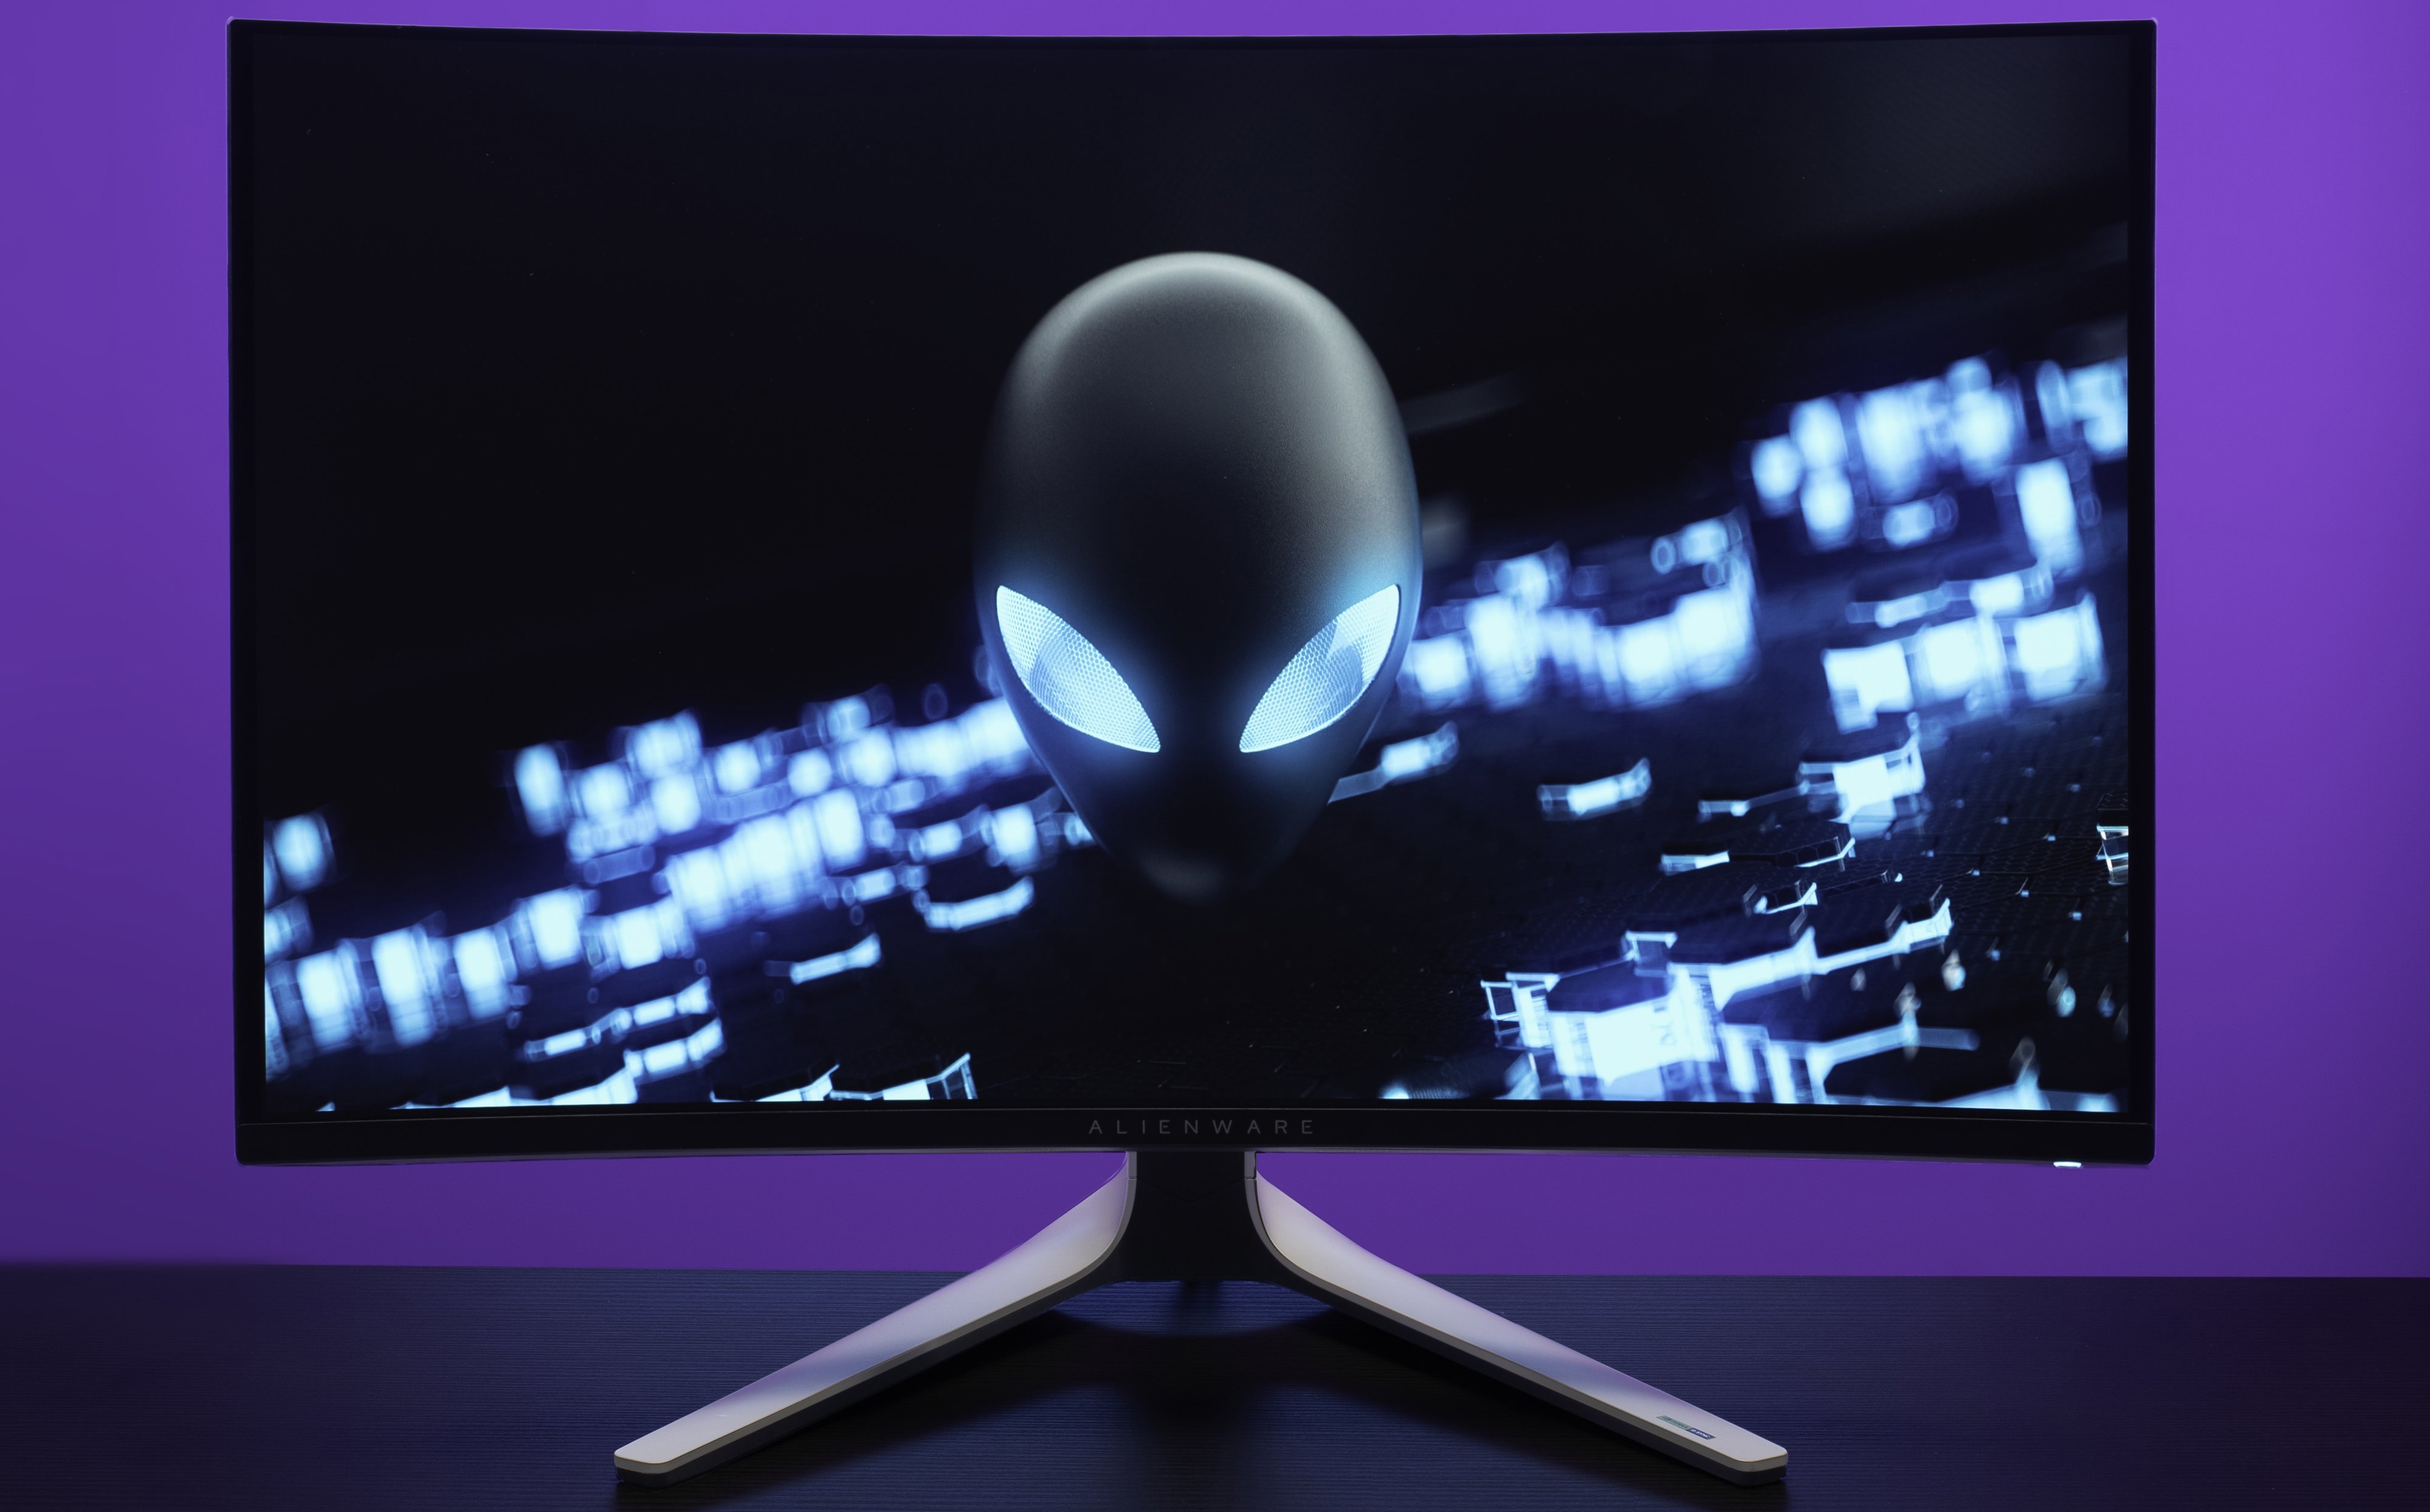 Alienware's new 32-inch 4K 240Hz OLED gaming monitor is made of